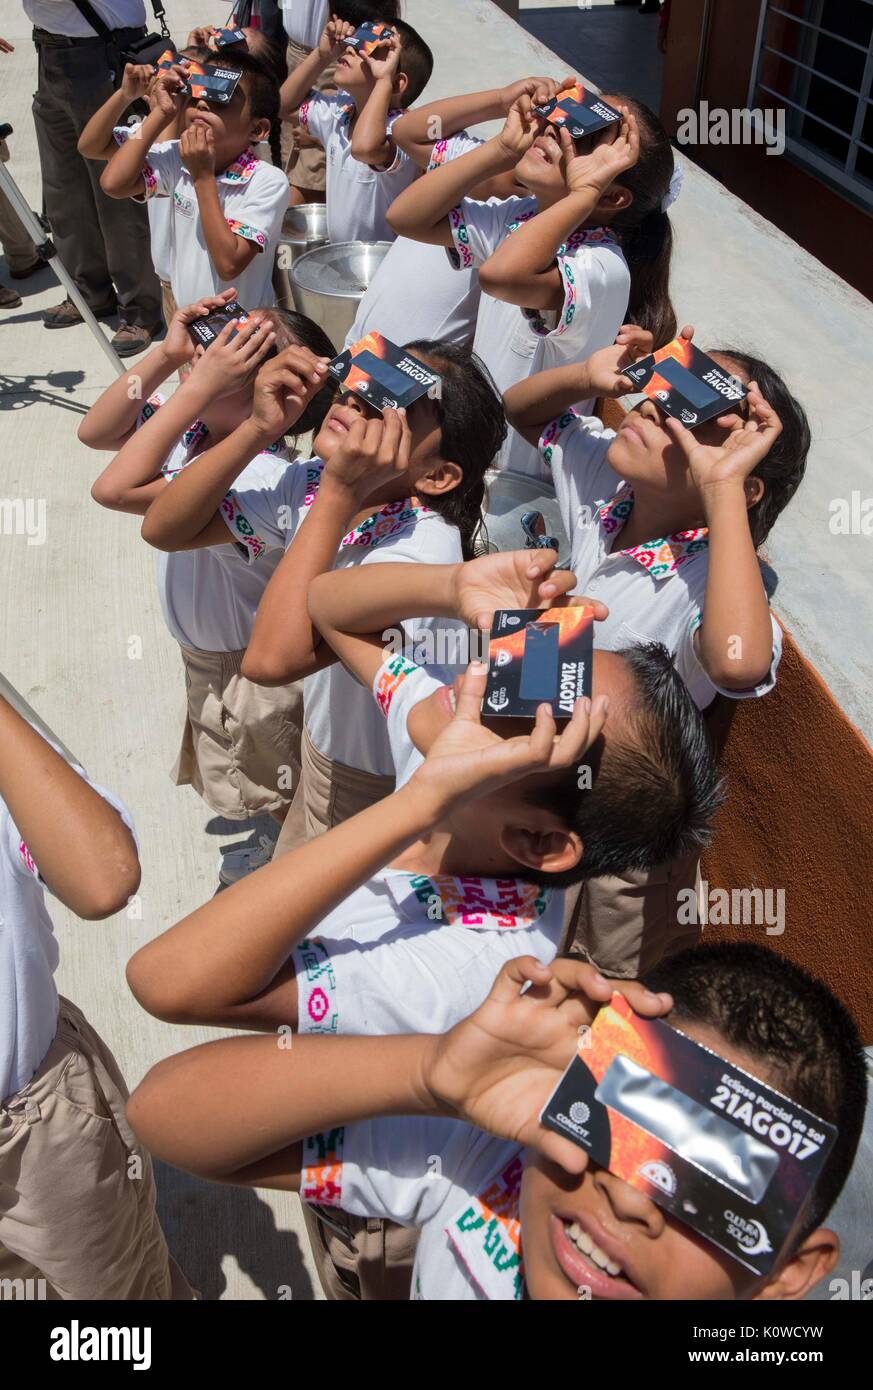 School children use protective glasses to view a partial solar eclipse at an elementary school August 21, 2017 in Aquismon, Mexico. The total eclipse swept across a narrow portion of the contiguous United States from Oregon to South Carolina and a partial solar eclipse was visible across the entire North American continent along with parts of South America, Africa, and Europe. Stock Photo